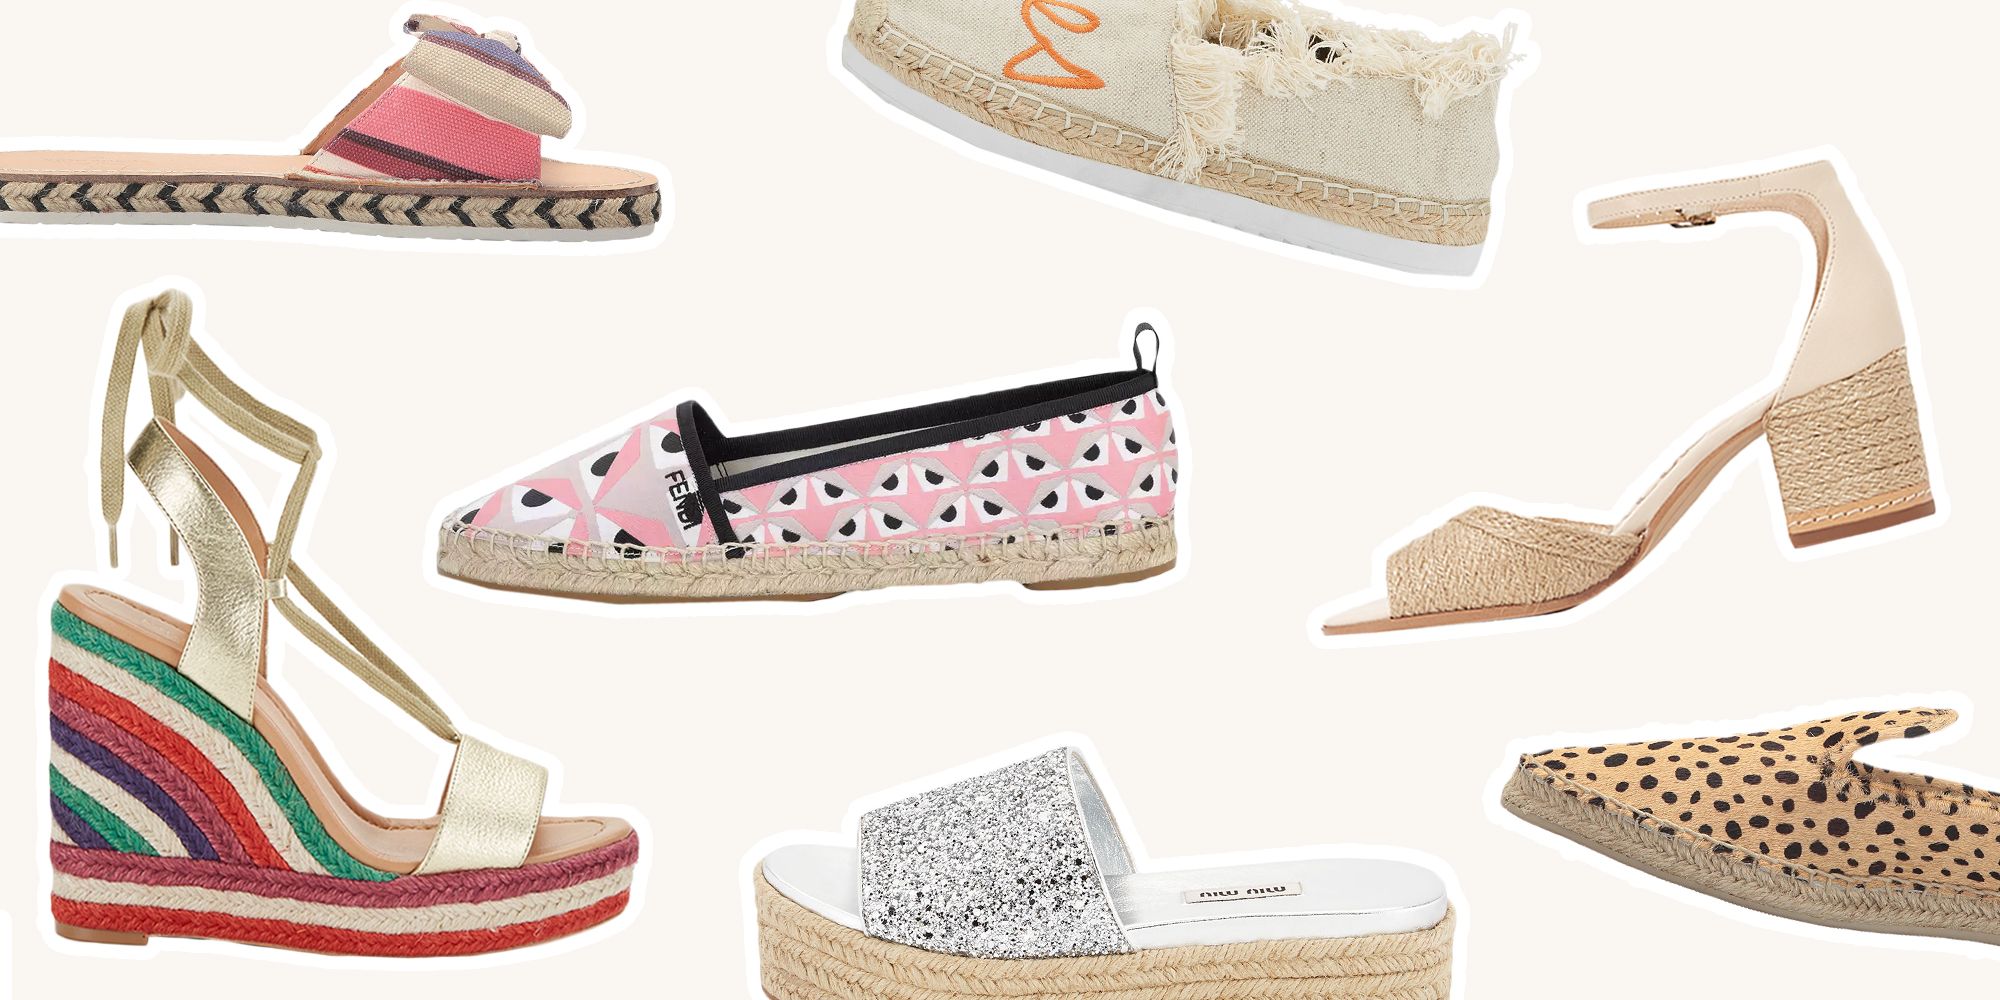 14 Best Espadrille in 2018 - Top Wedges and Sandals for Women